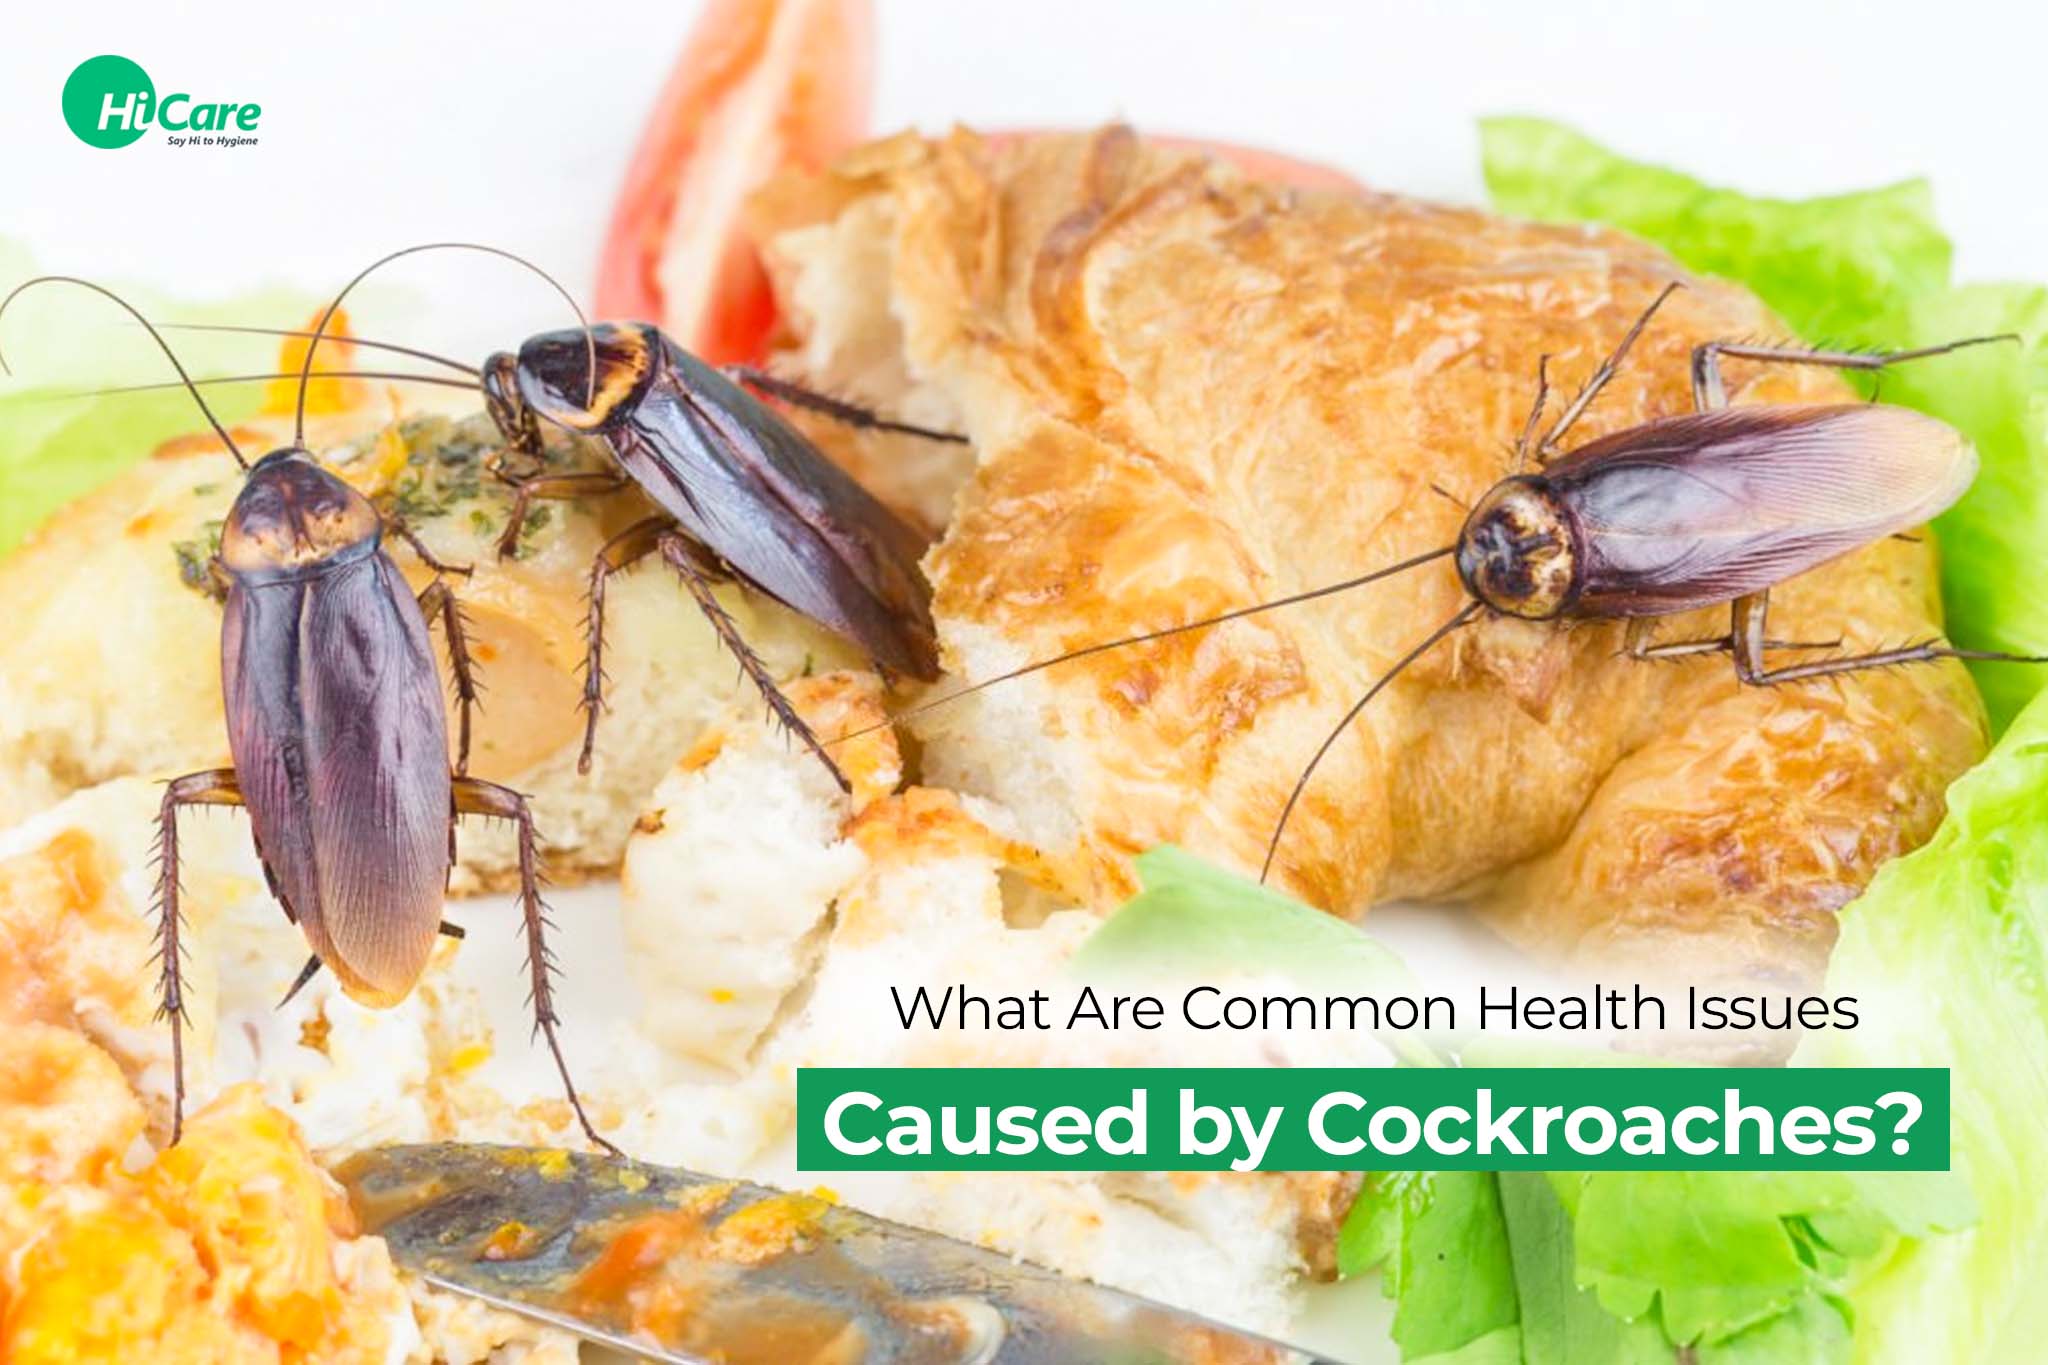 What Are Common Health Issues Caused by Cockroaches?